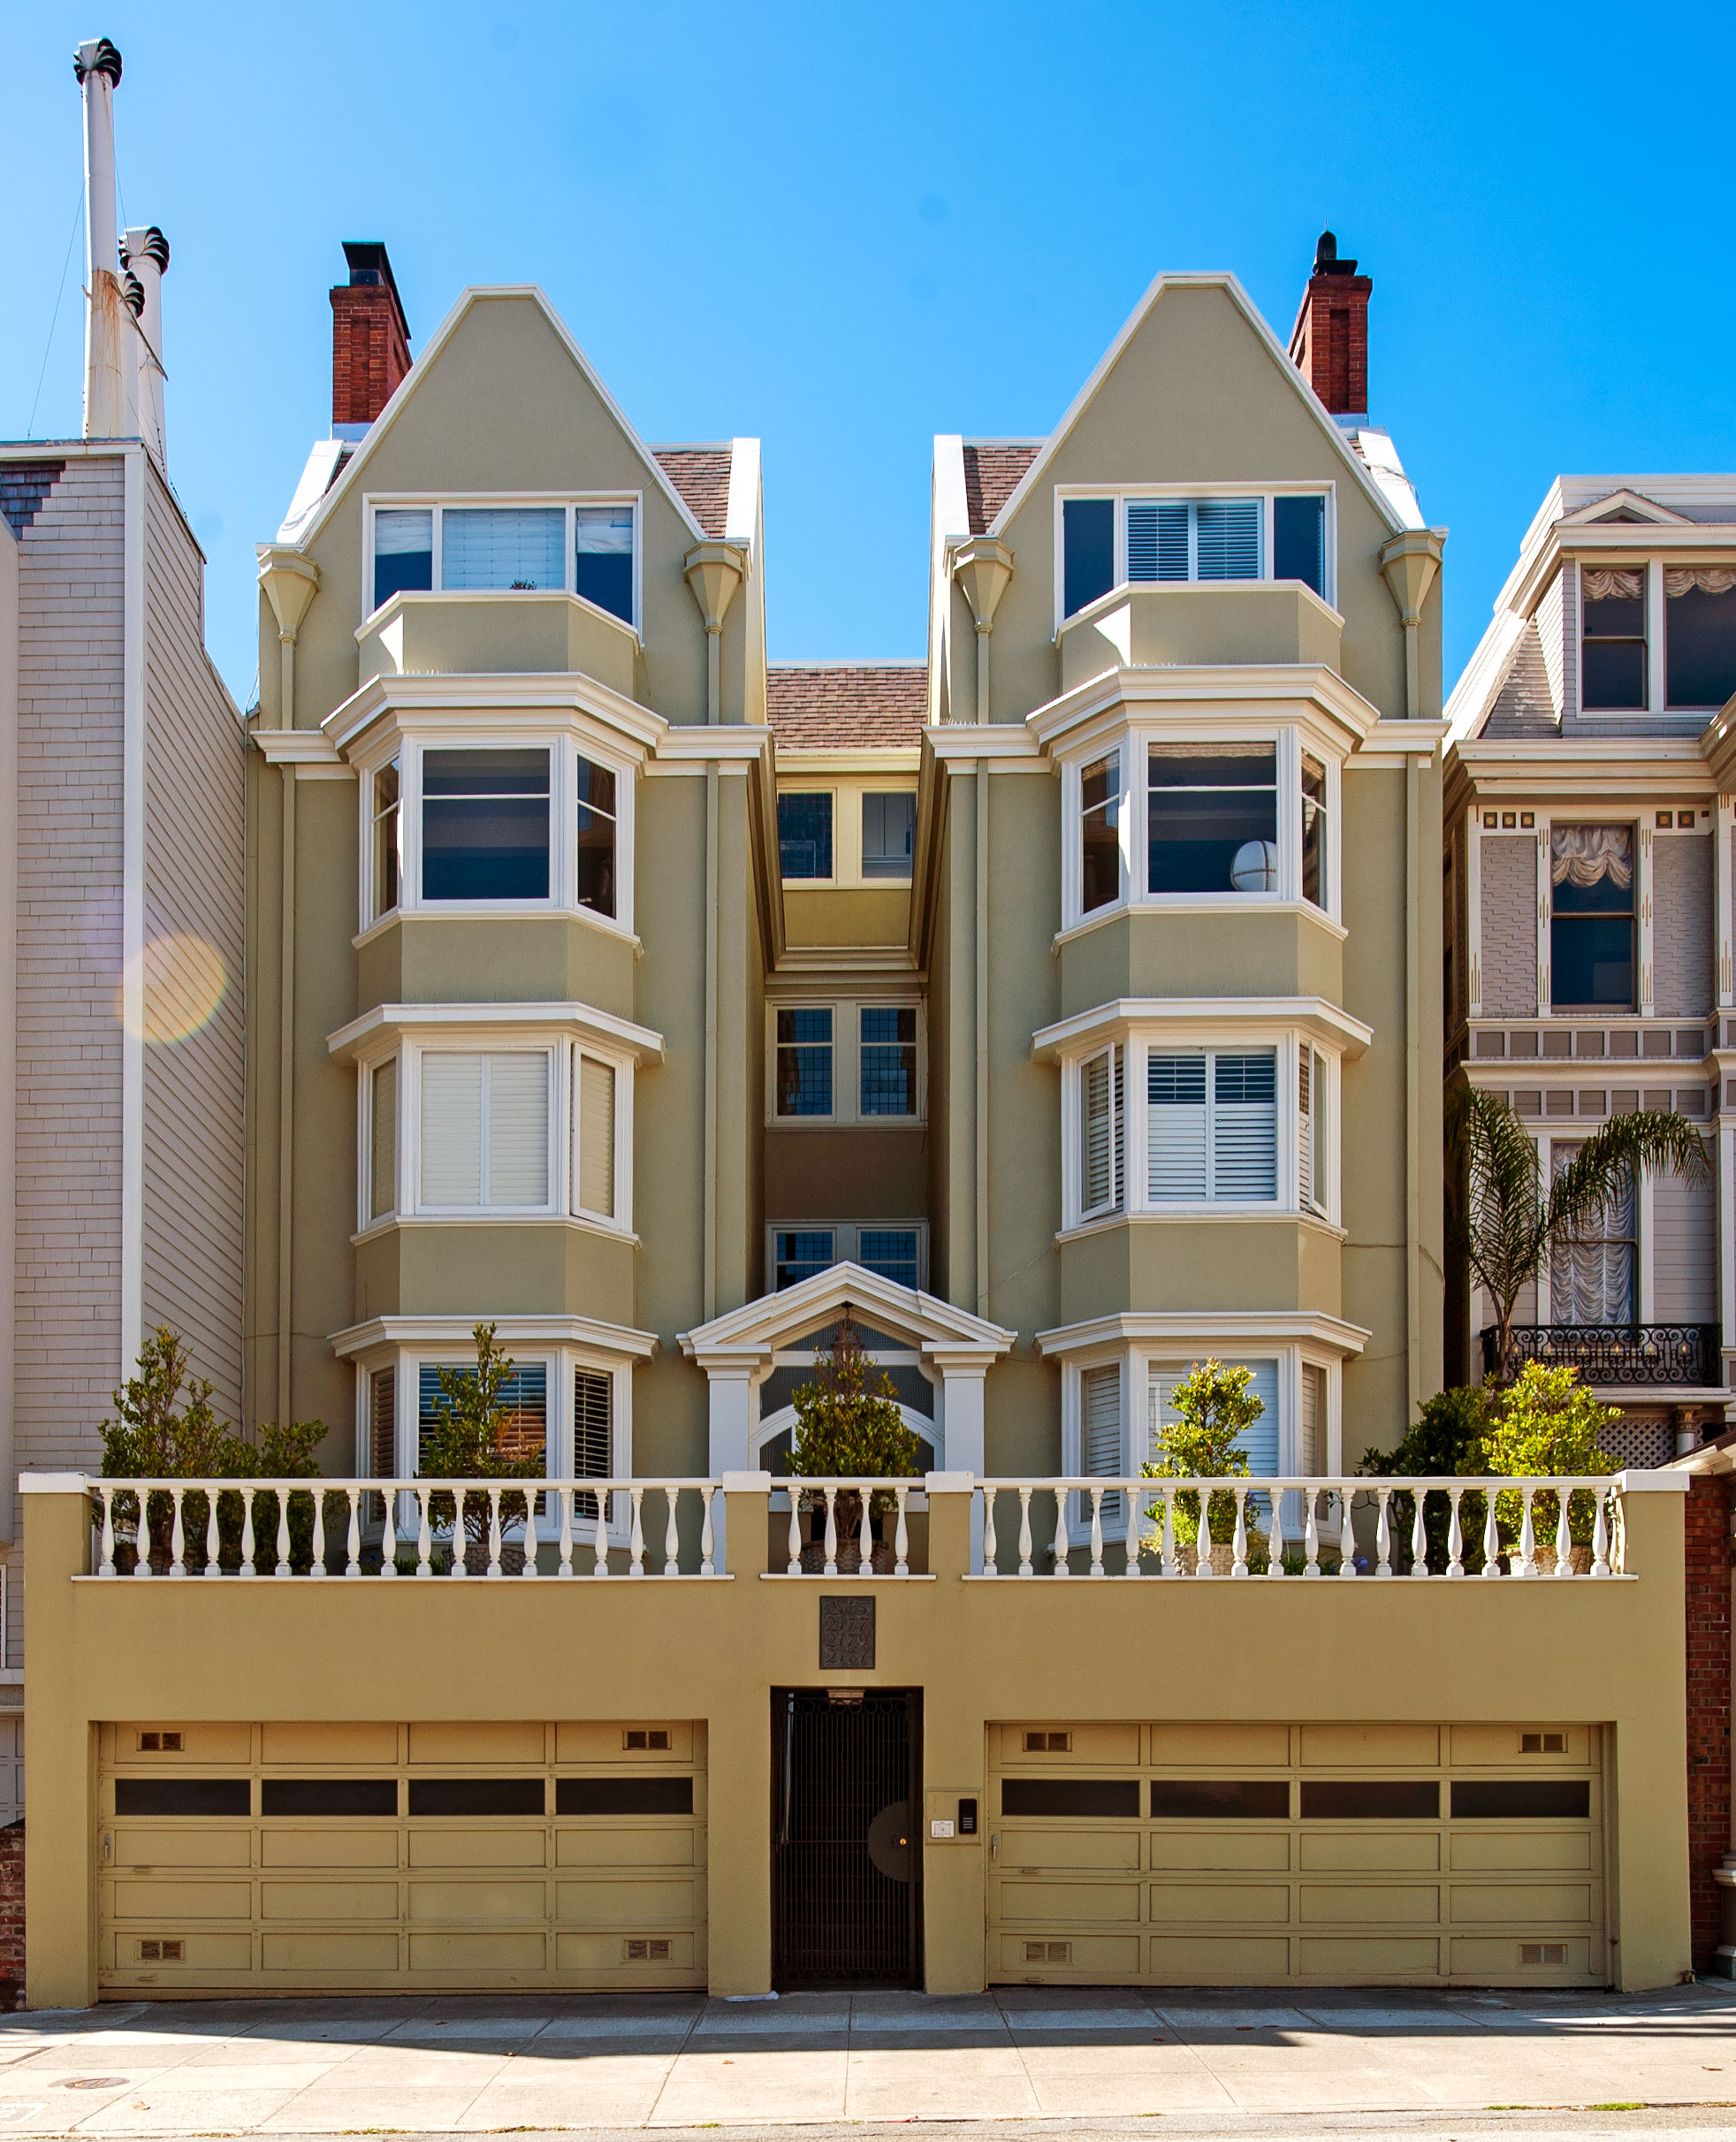 2175-2181Pacific Avenue in Pacific Heights, designed by Albert L. Farr, built 1902